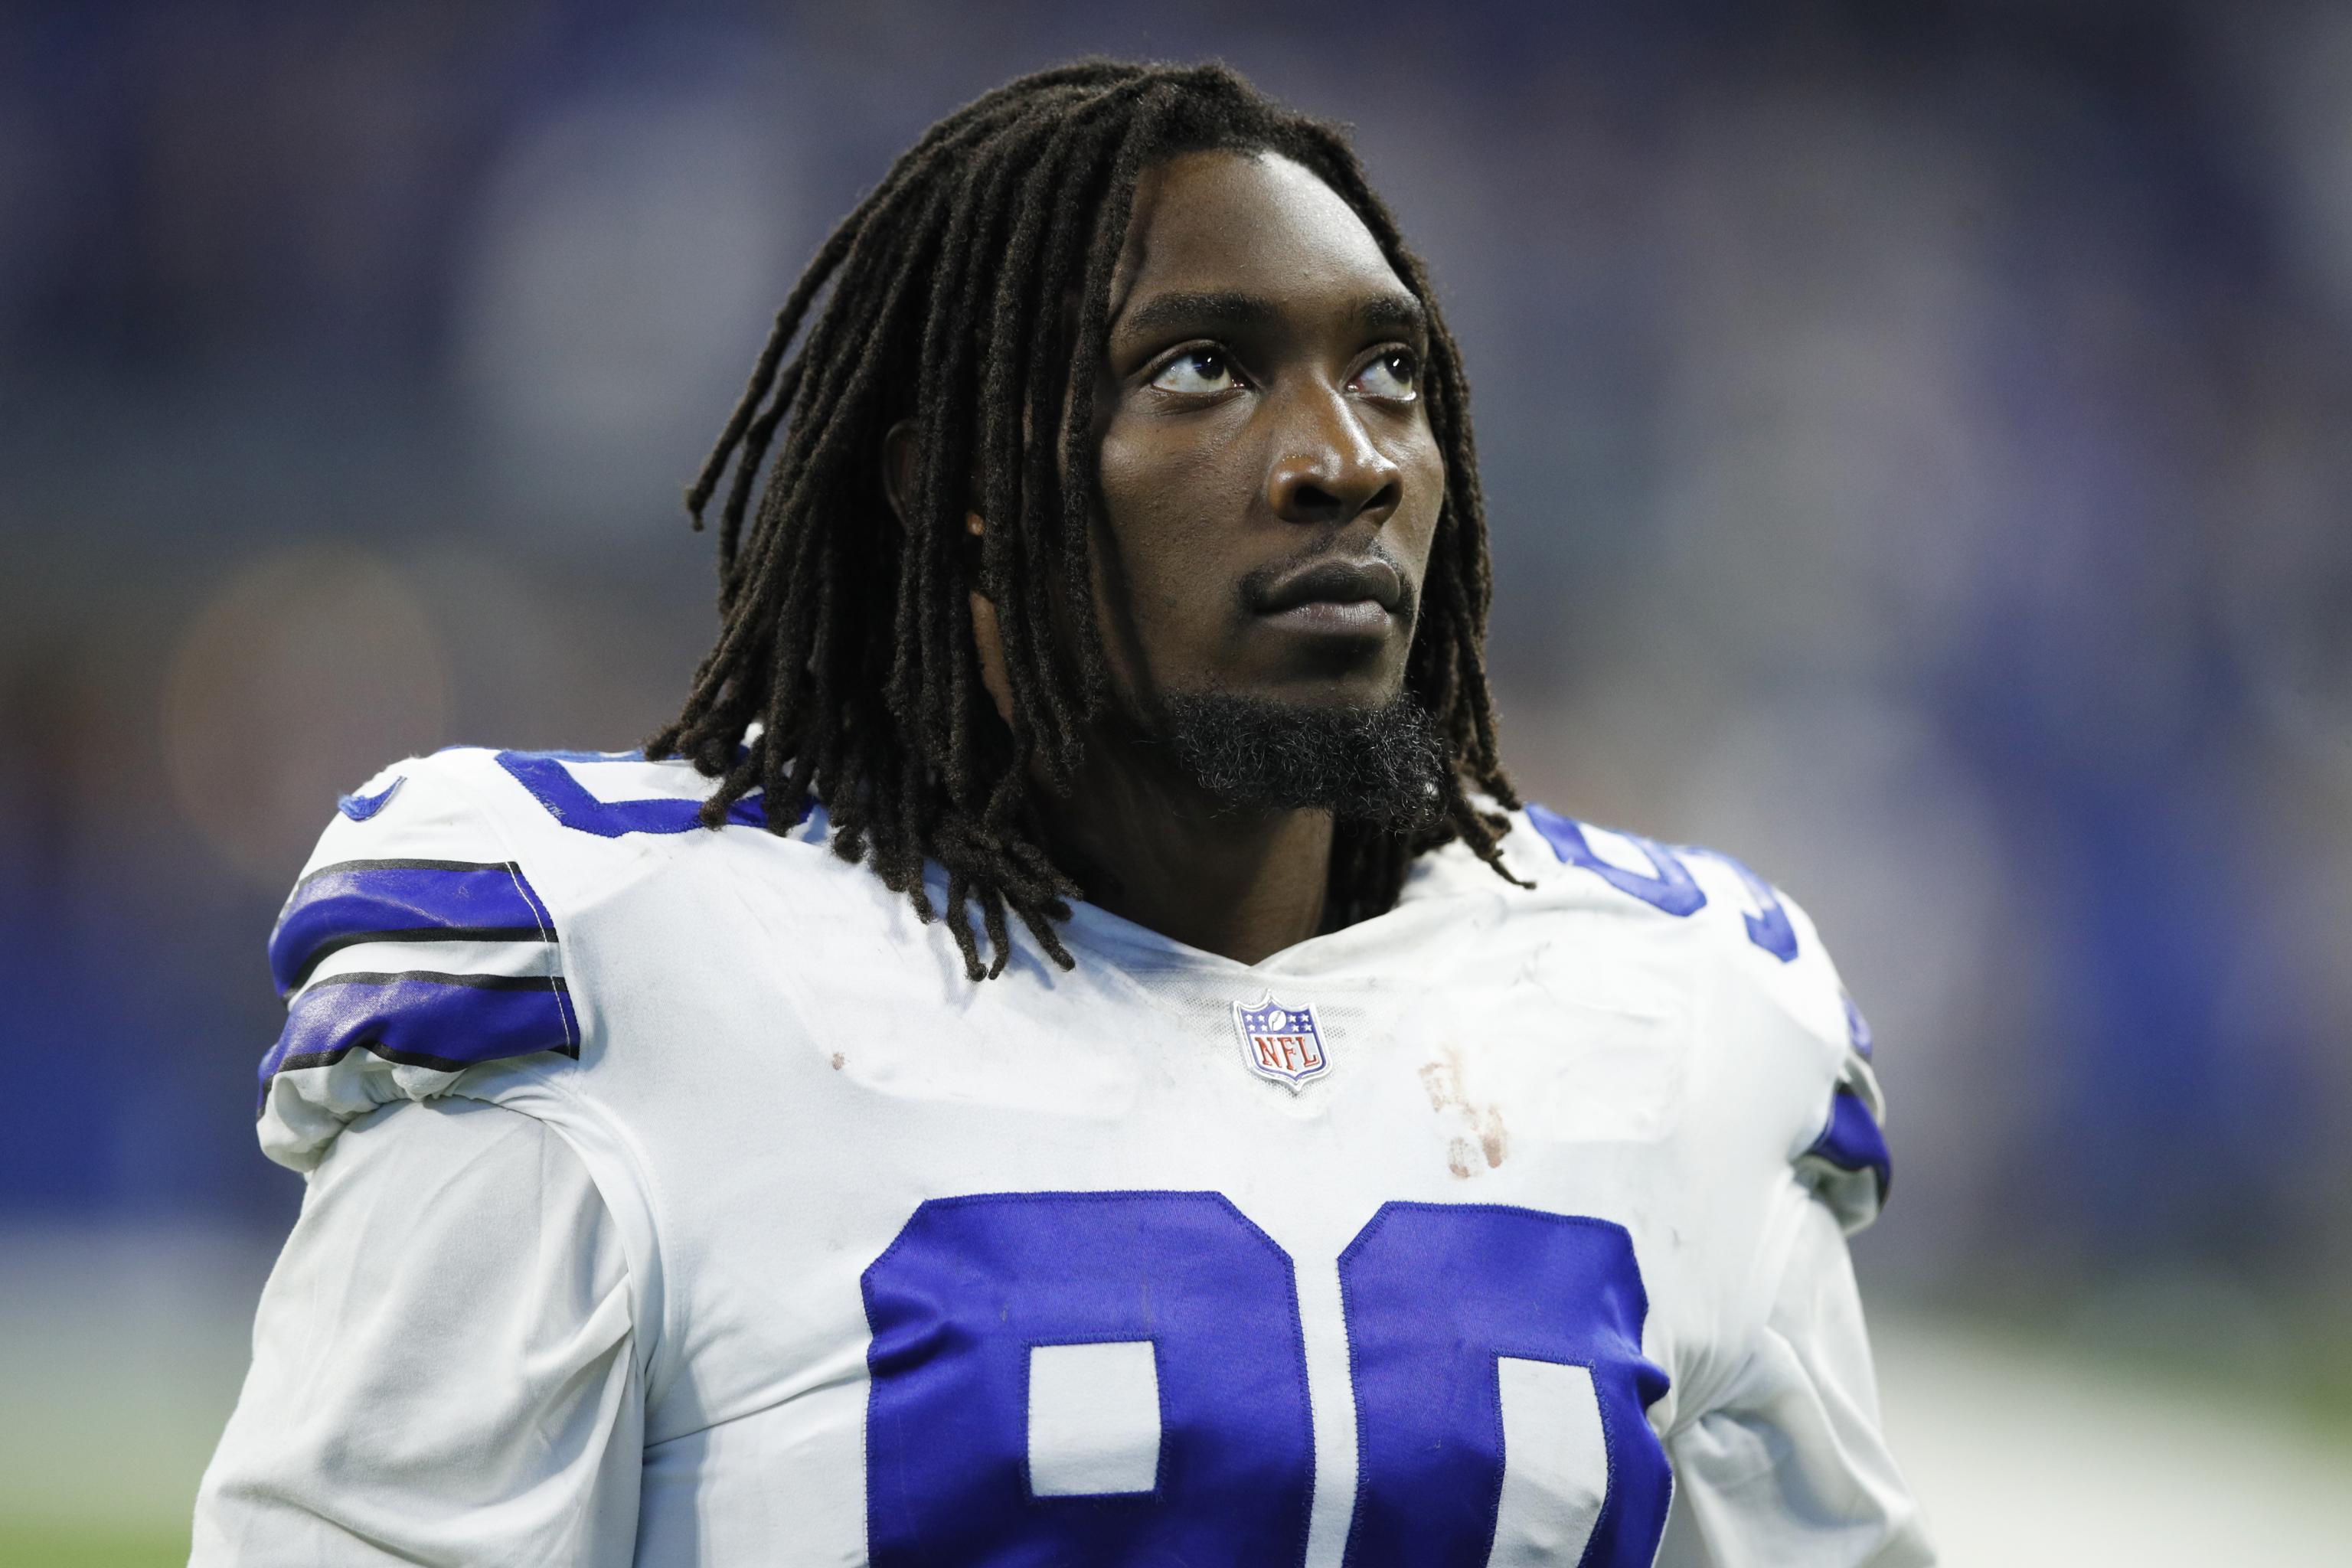 Cowboys Rumors: Demarcus Lawrence Offered $20M Per Year, DL Wants